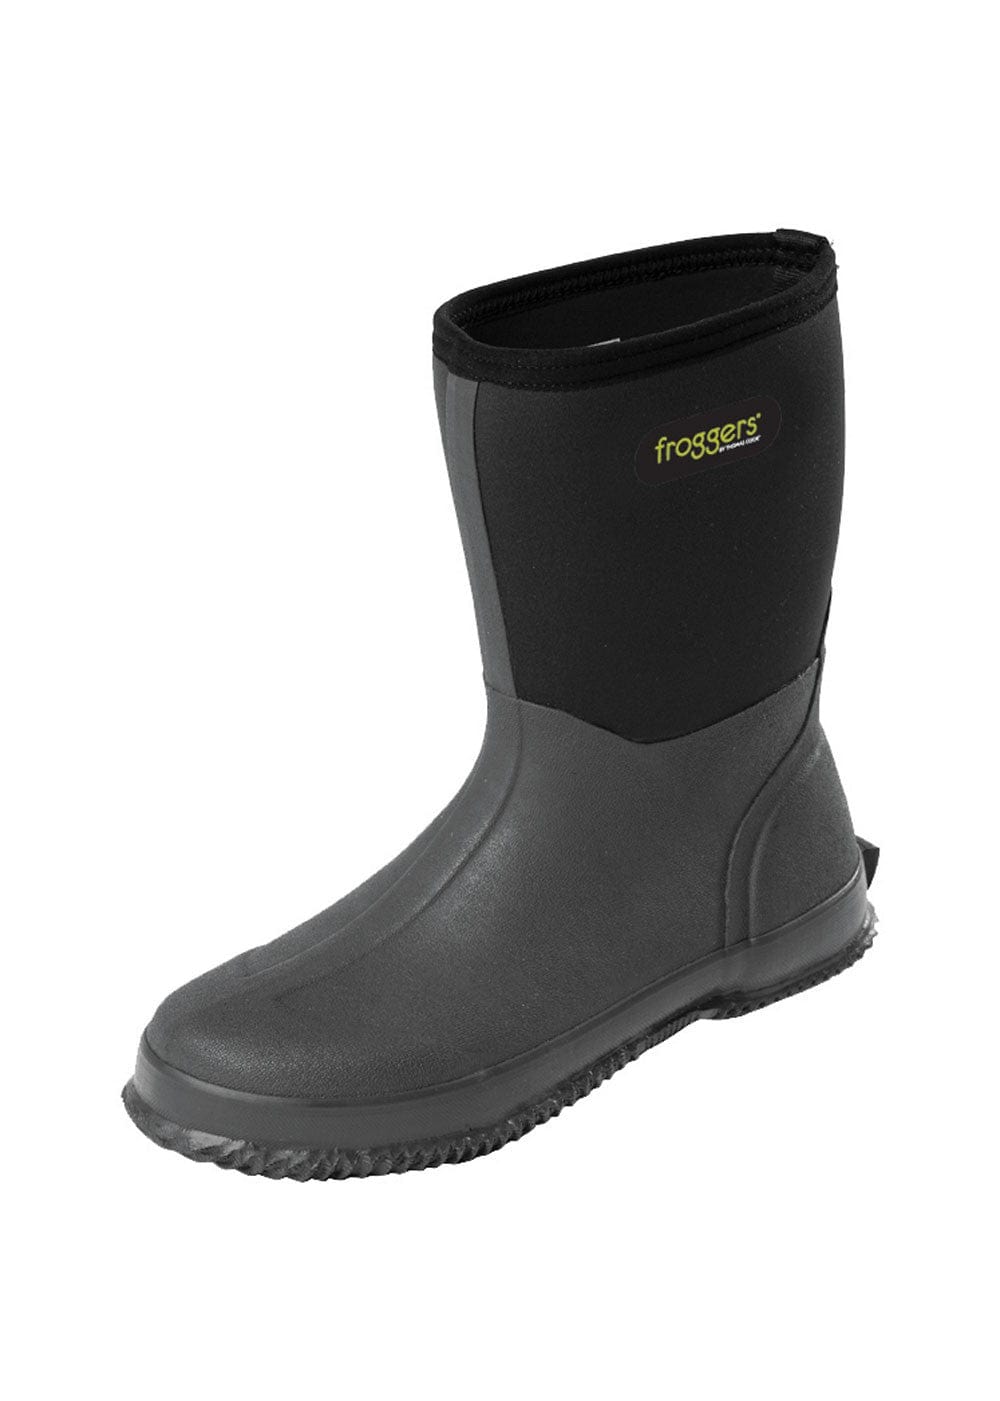 Froggers Womens Boots & Shoes WMN 7 / Black Froggers Womens Scrub Boots (TCP28206)